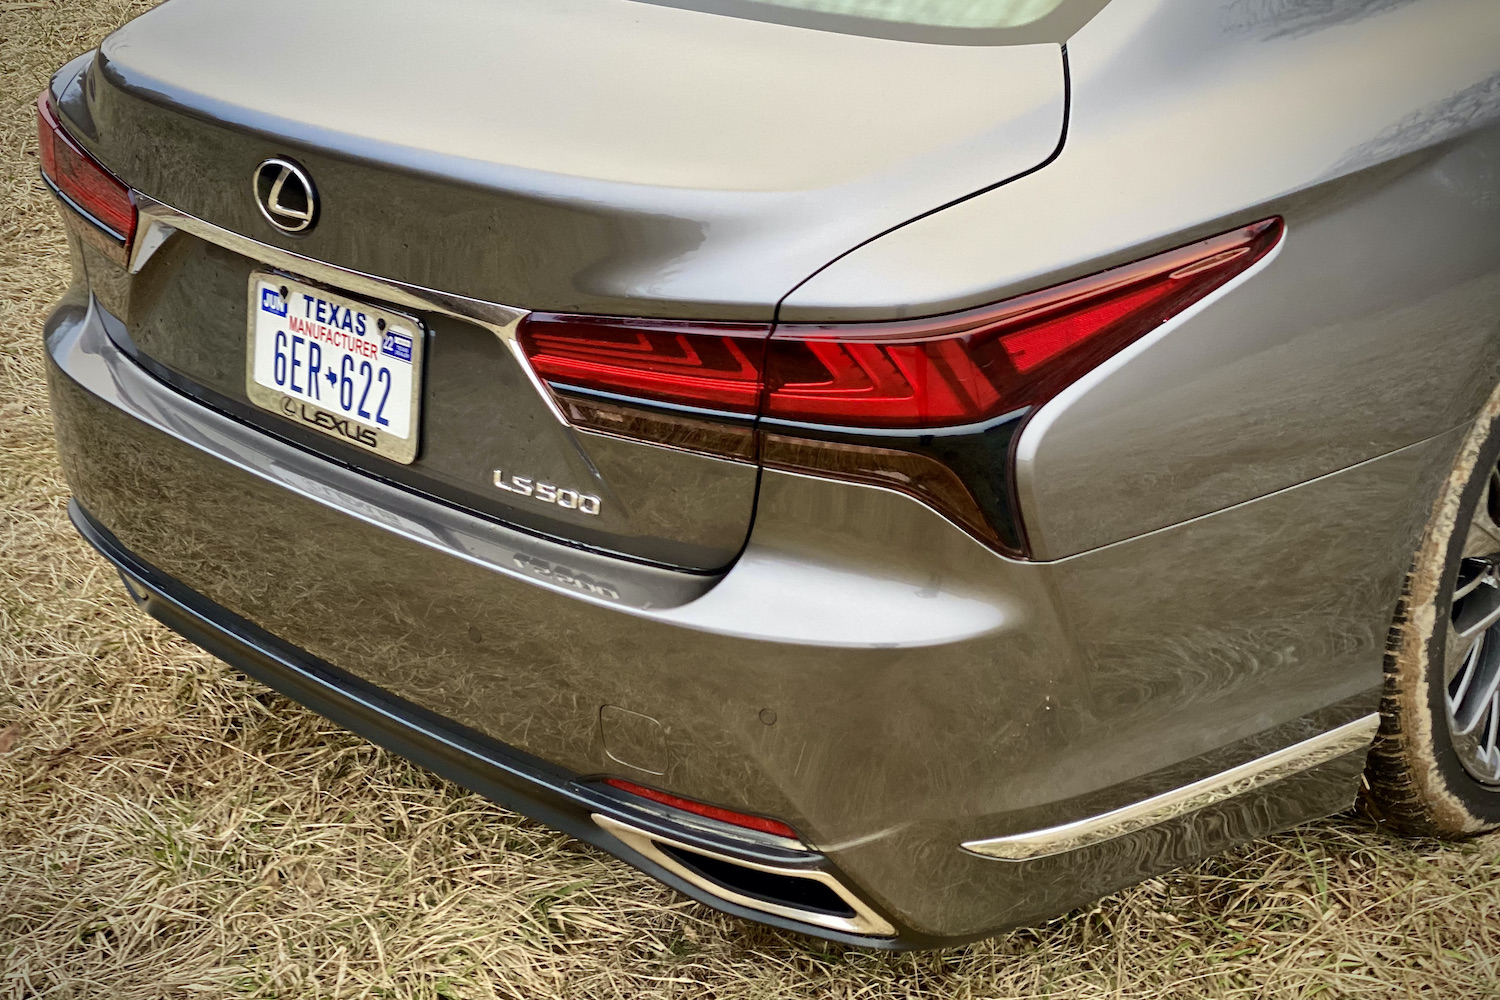 A close-up of the 2021 Lexus LS500's taillight in a grassy field.